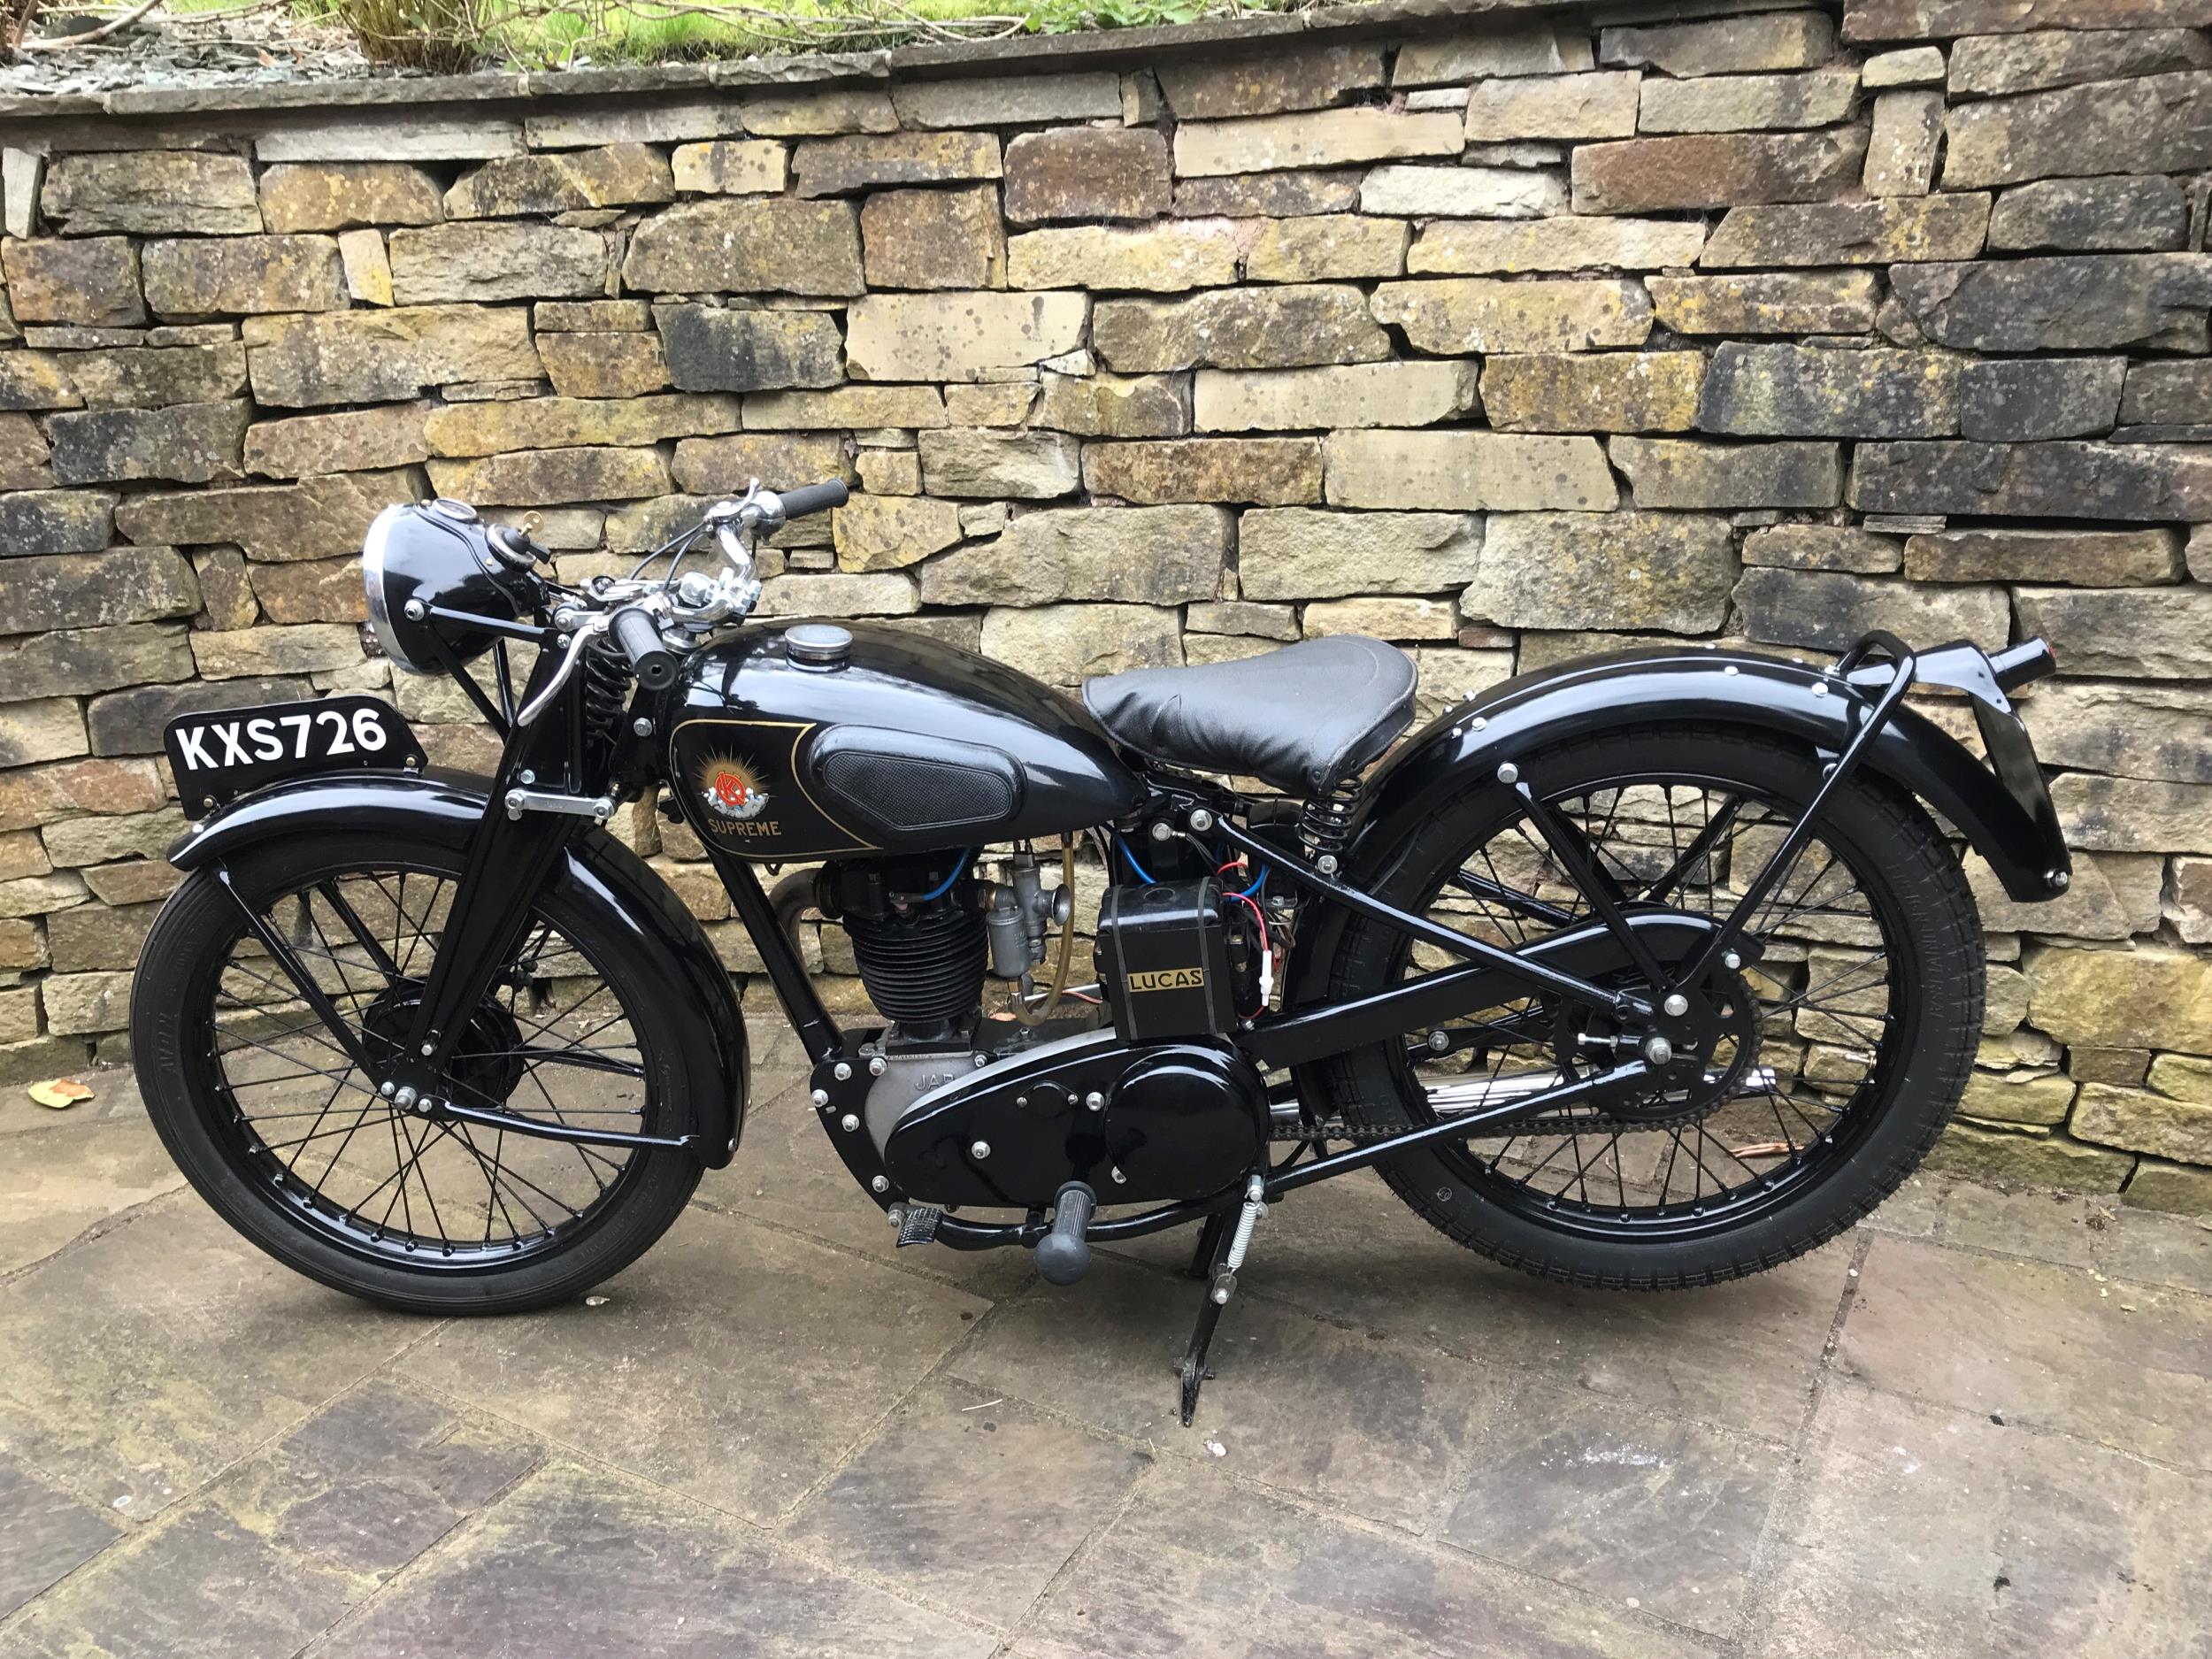 A 1936 OK SUPREME FLYING CLOUD MOTORCYCLE, 250 OHV J.A.P. ENGINE, 4-SPEED GEARBOX, NICELY - Image 4 of 4